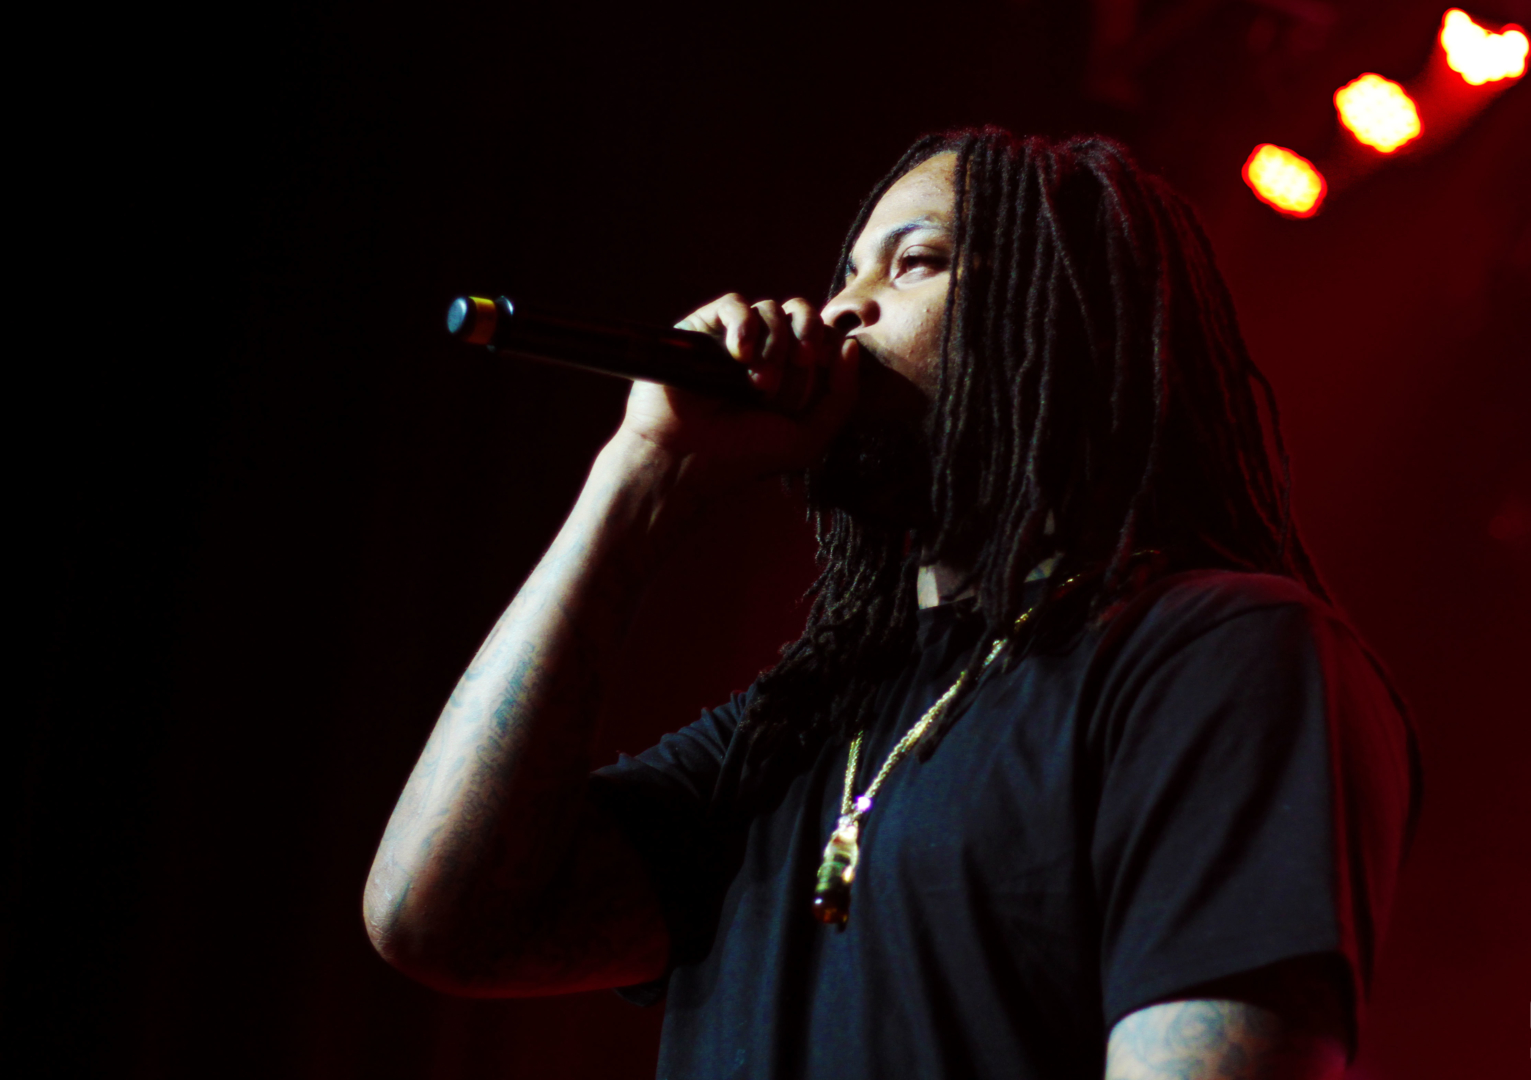  Rapper Waka Flocka Flame will perform on Thursday night as the headliner for the 2019 Homecoming Concert. | Courtesy of Eddy Rissling for The Come Up Show via Wikimedia Commons